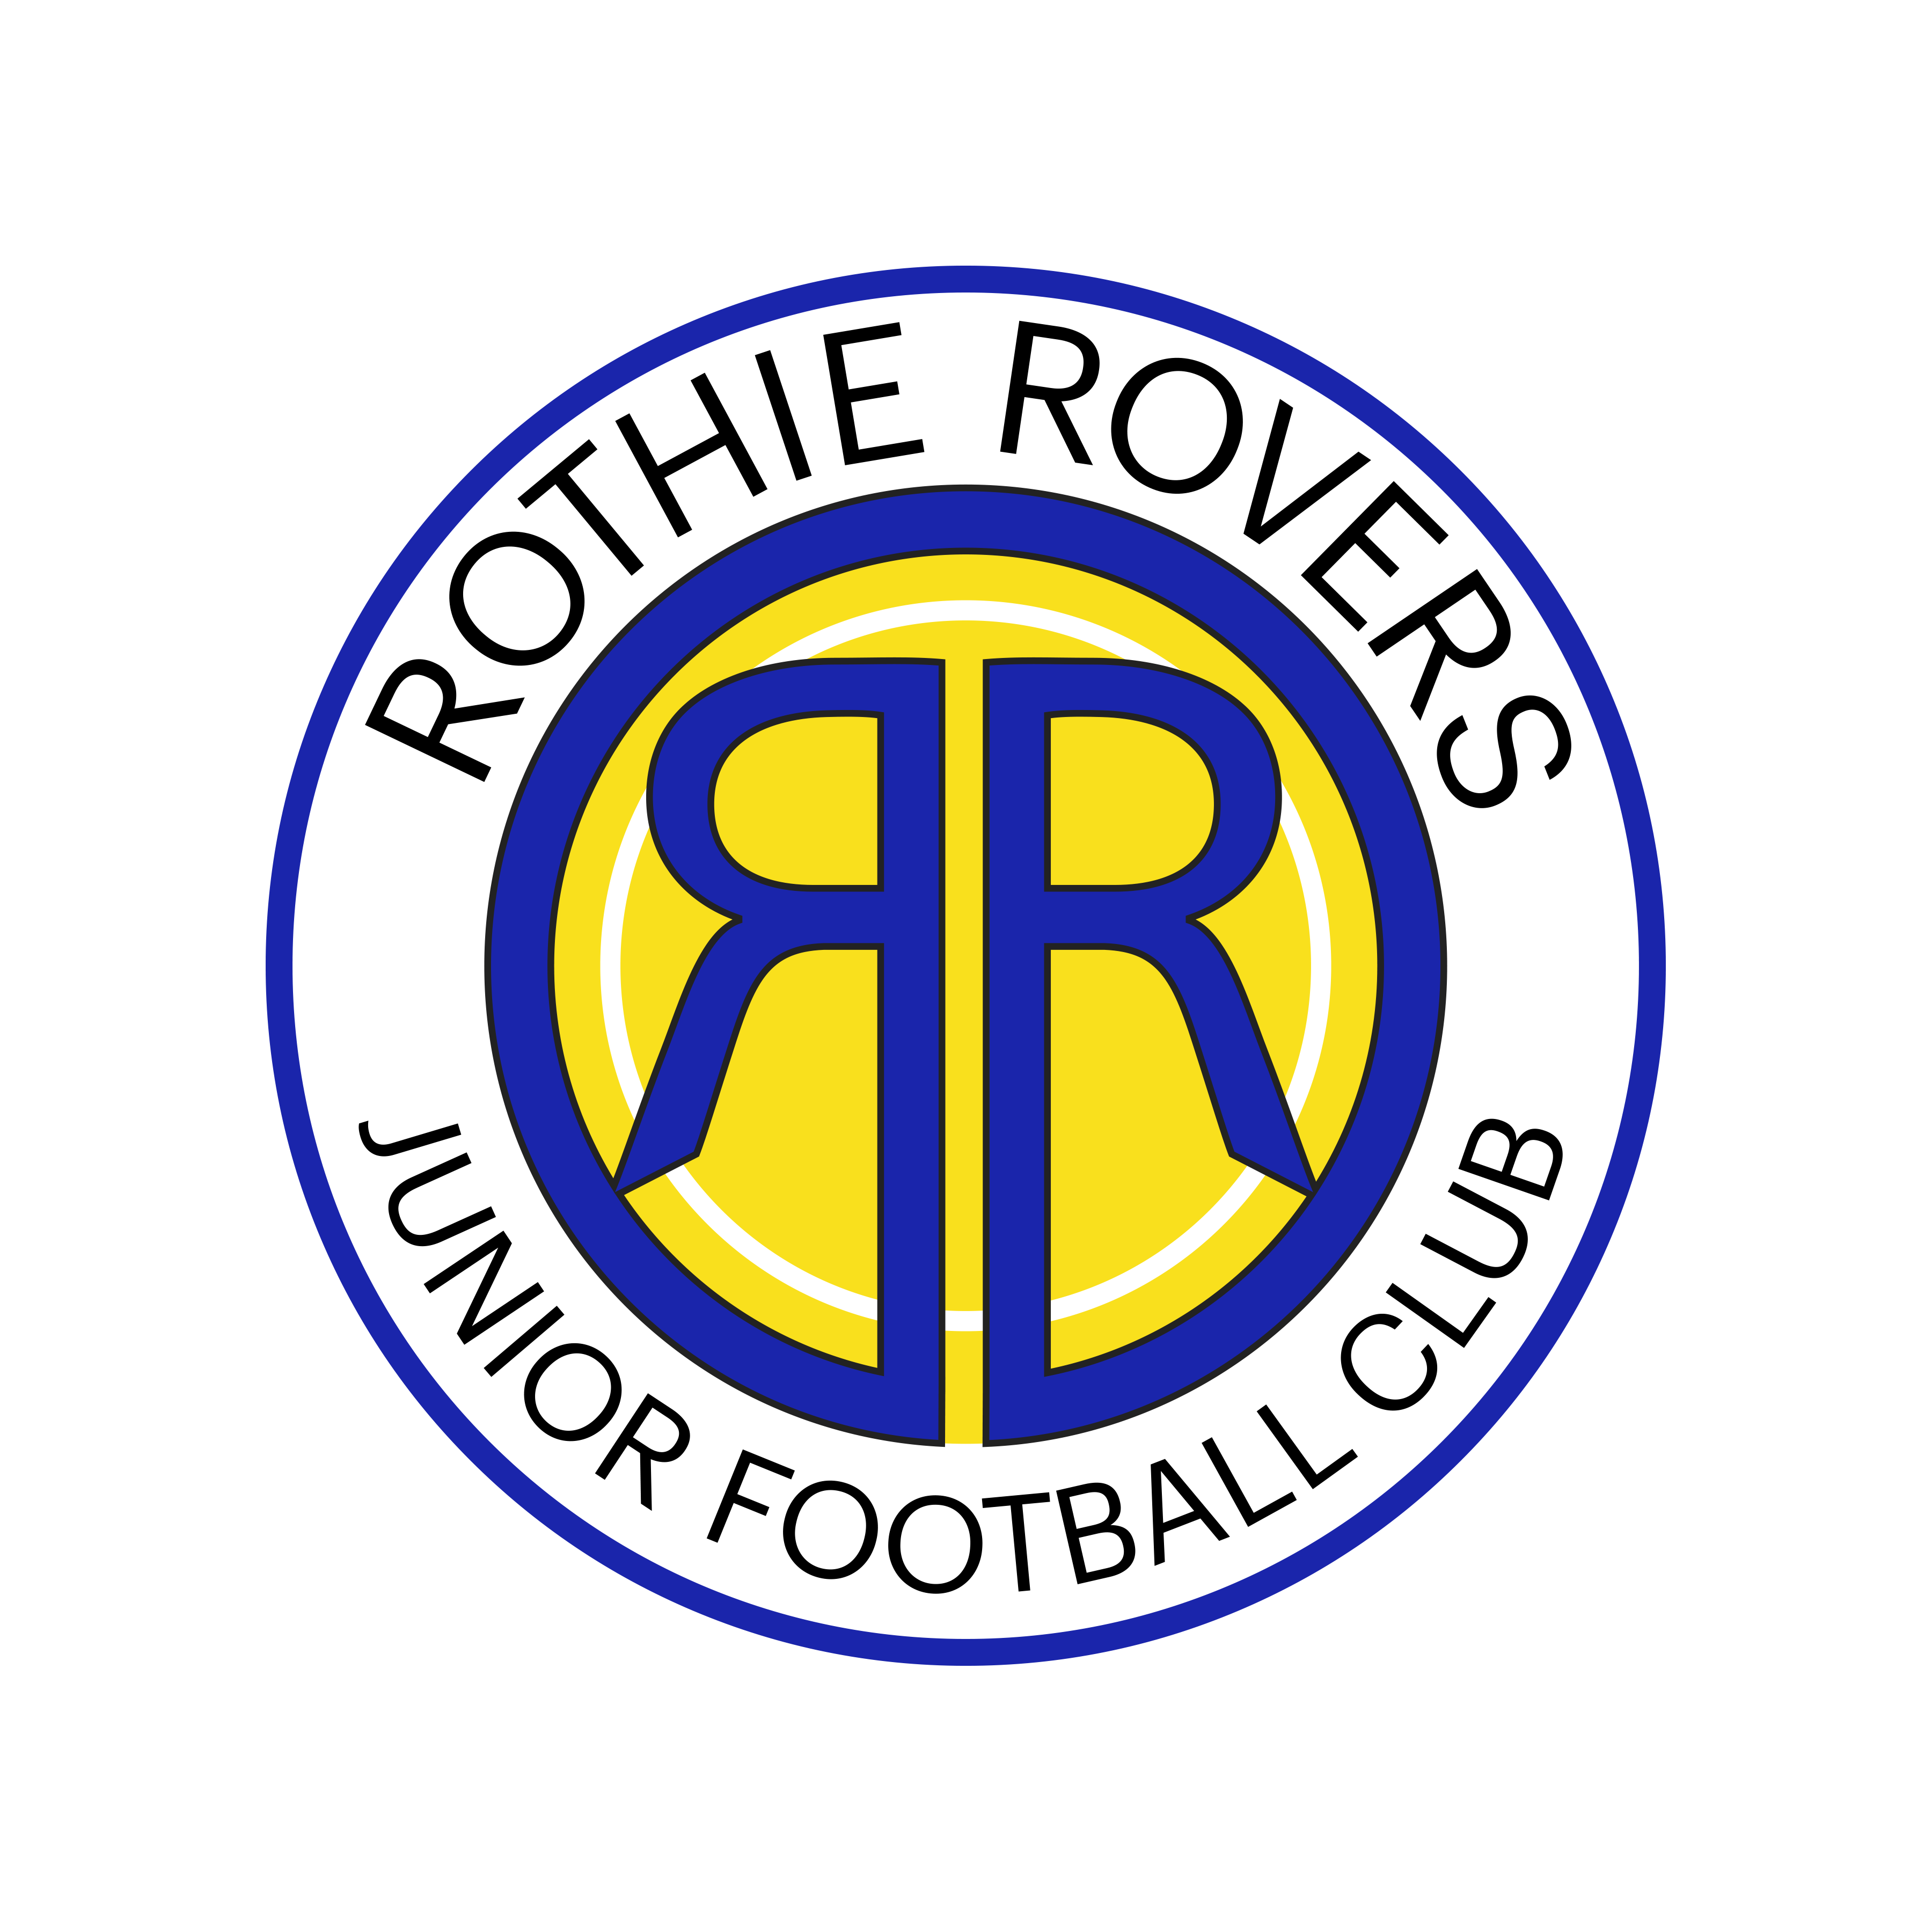 Rothie Rovers AFC image